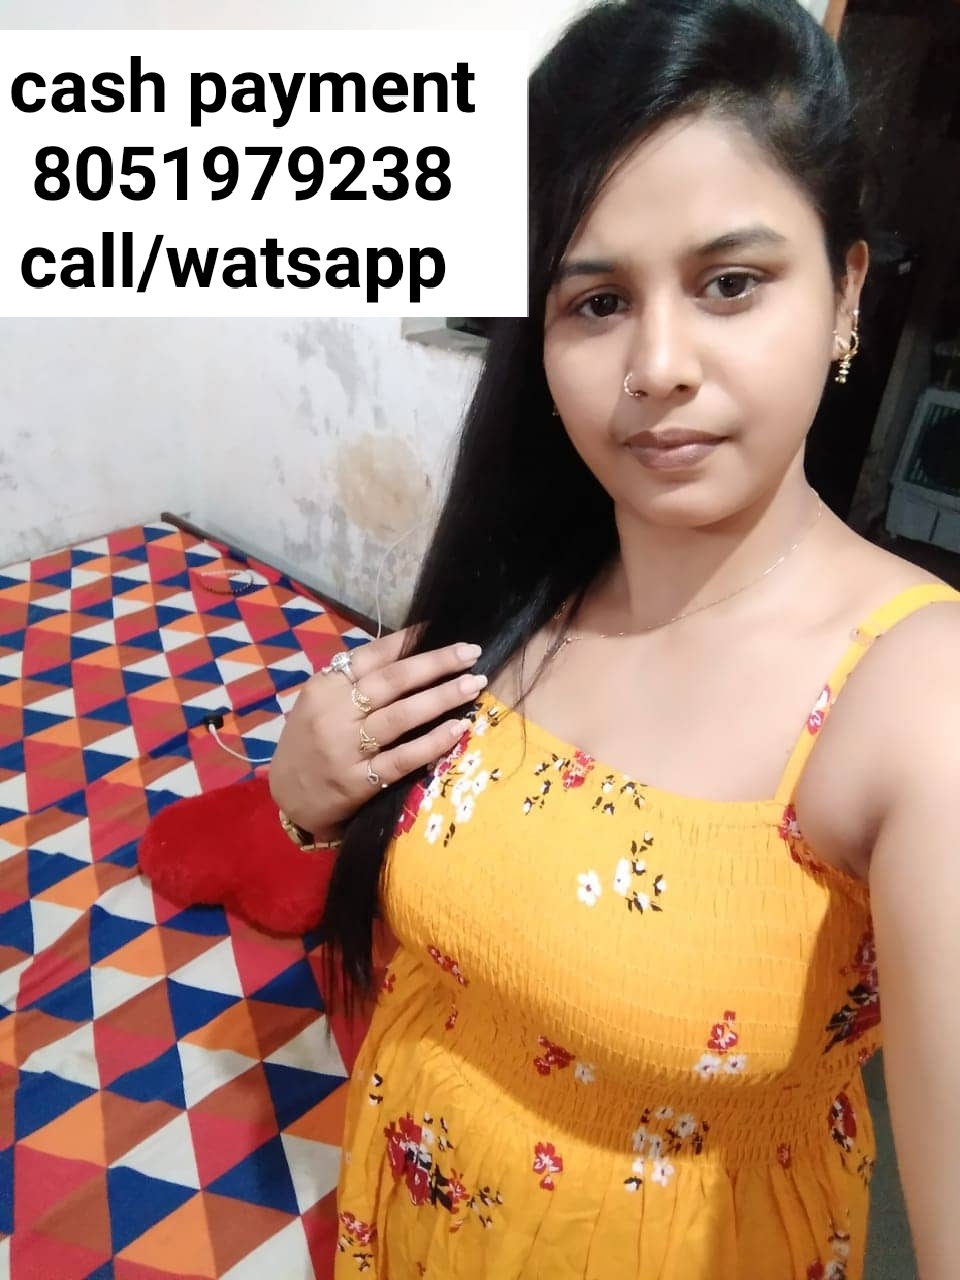 Botad trusted genuine service available anytime 